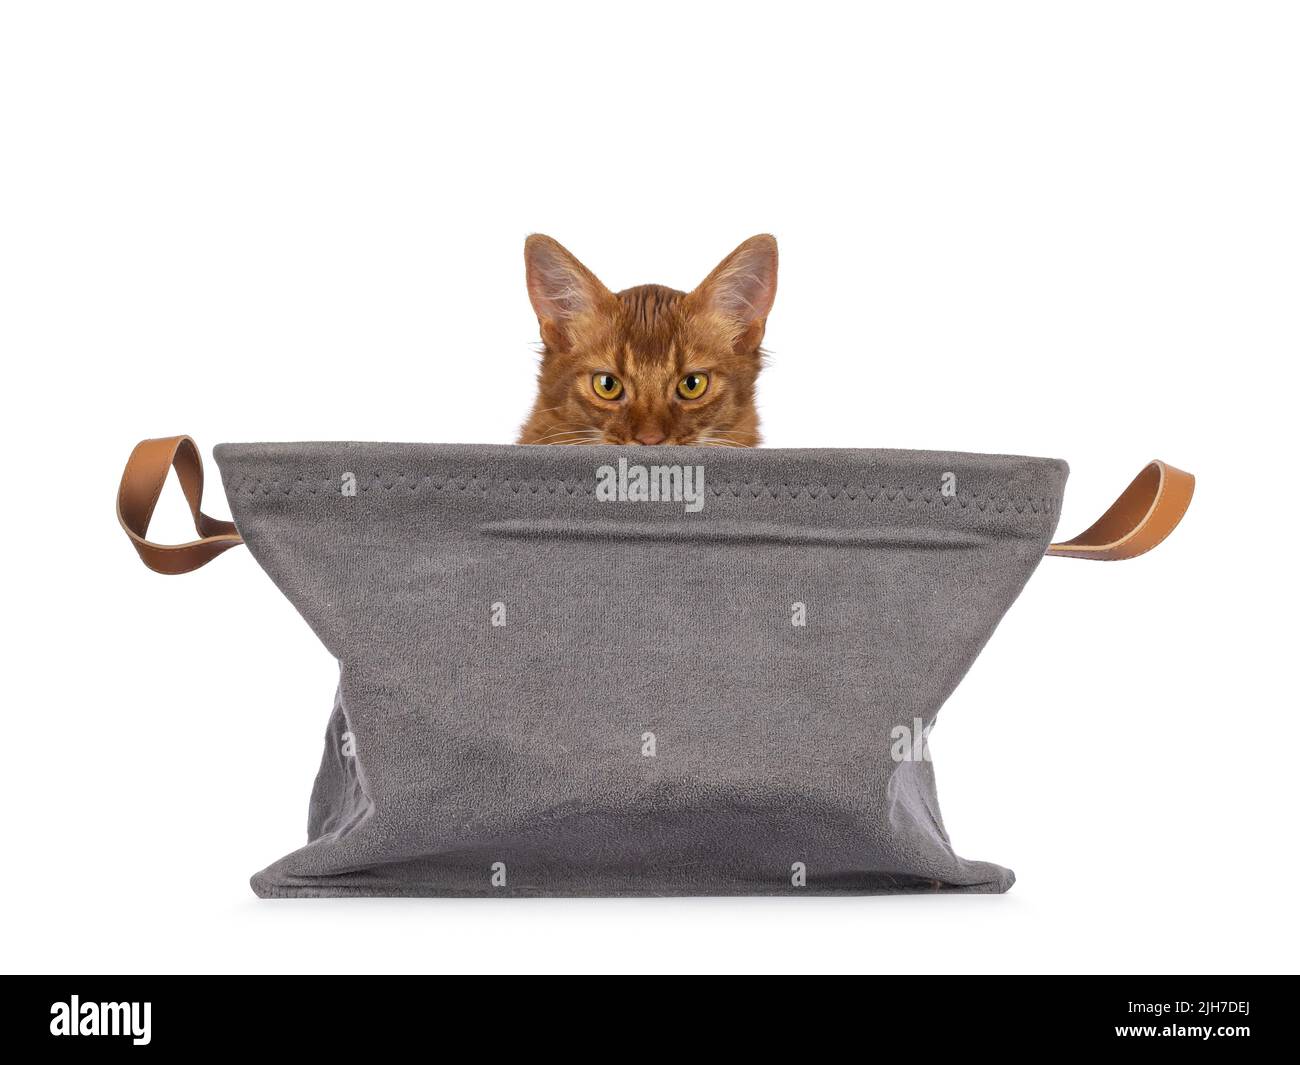 Sorrel Somali cat kitten, sitting in gray basket. Looking just over edge towards camera. Isolated on a white background. Stock Photo